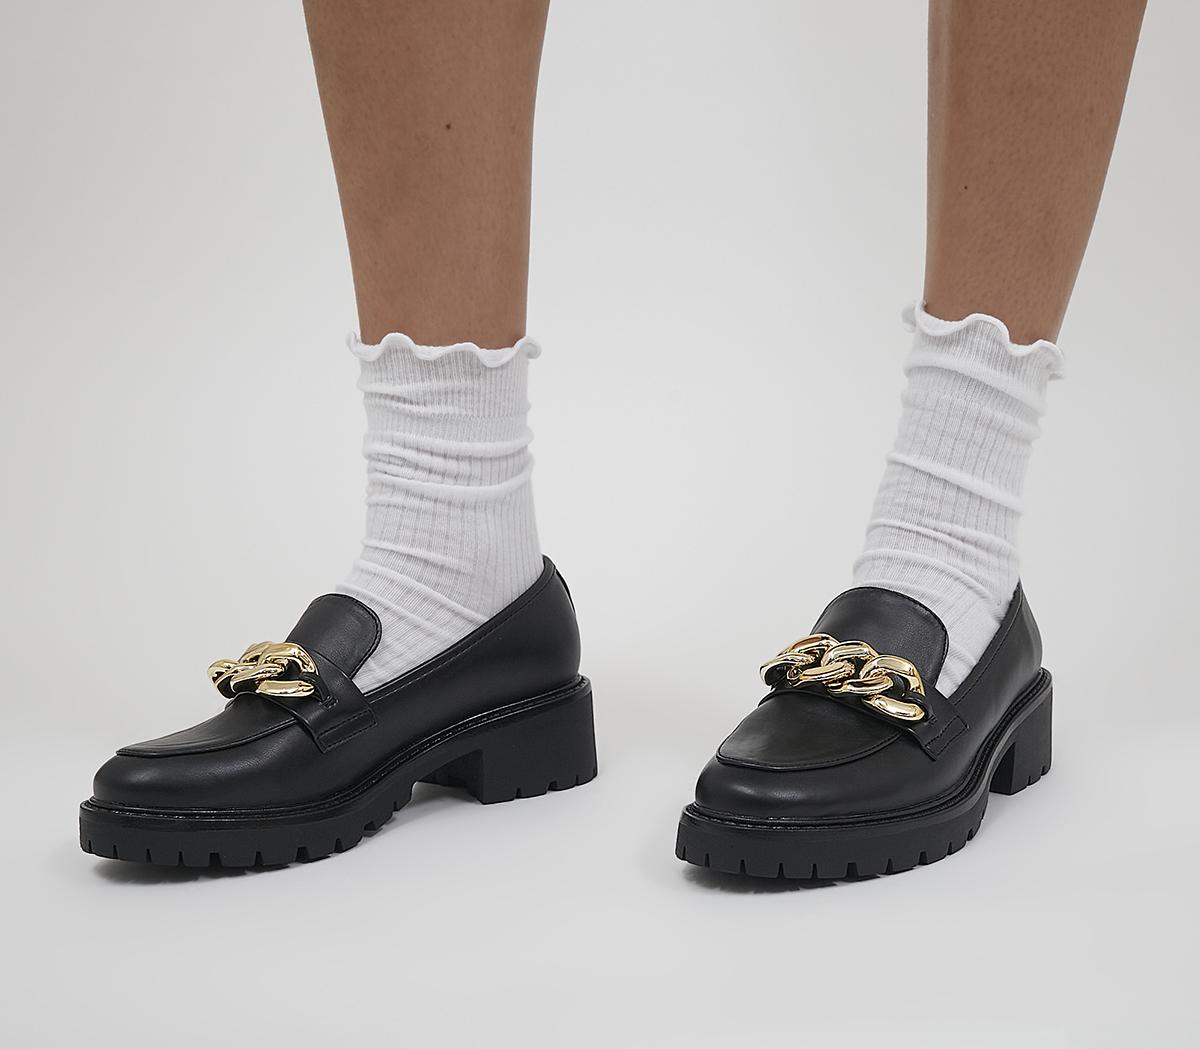 OFFICE Malted Chunky Chain Loafers Black - Women’s Loafers